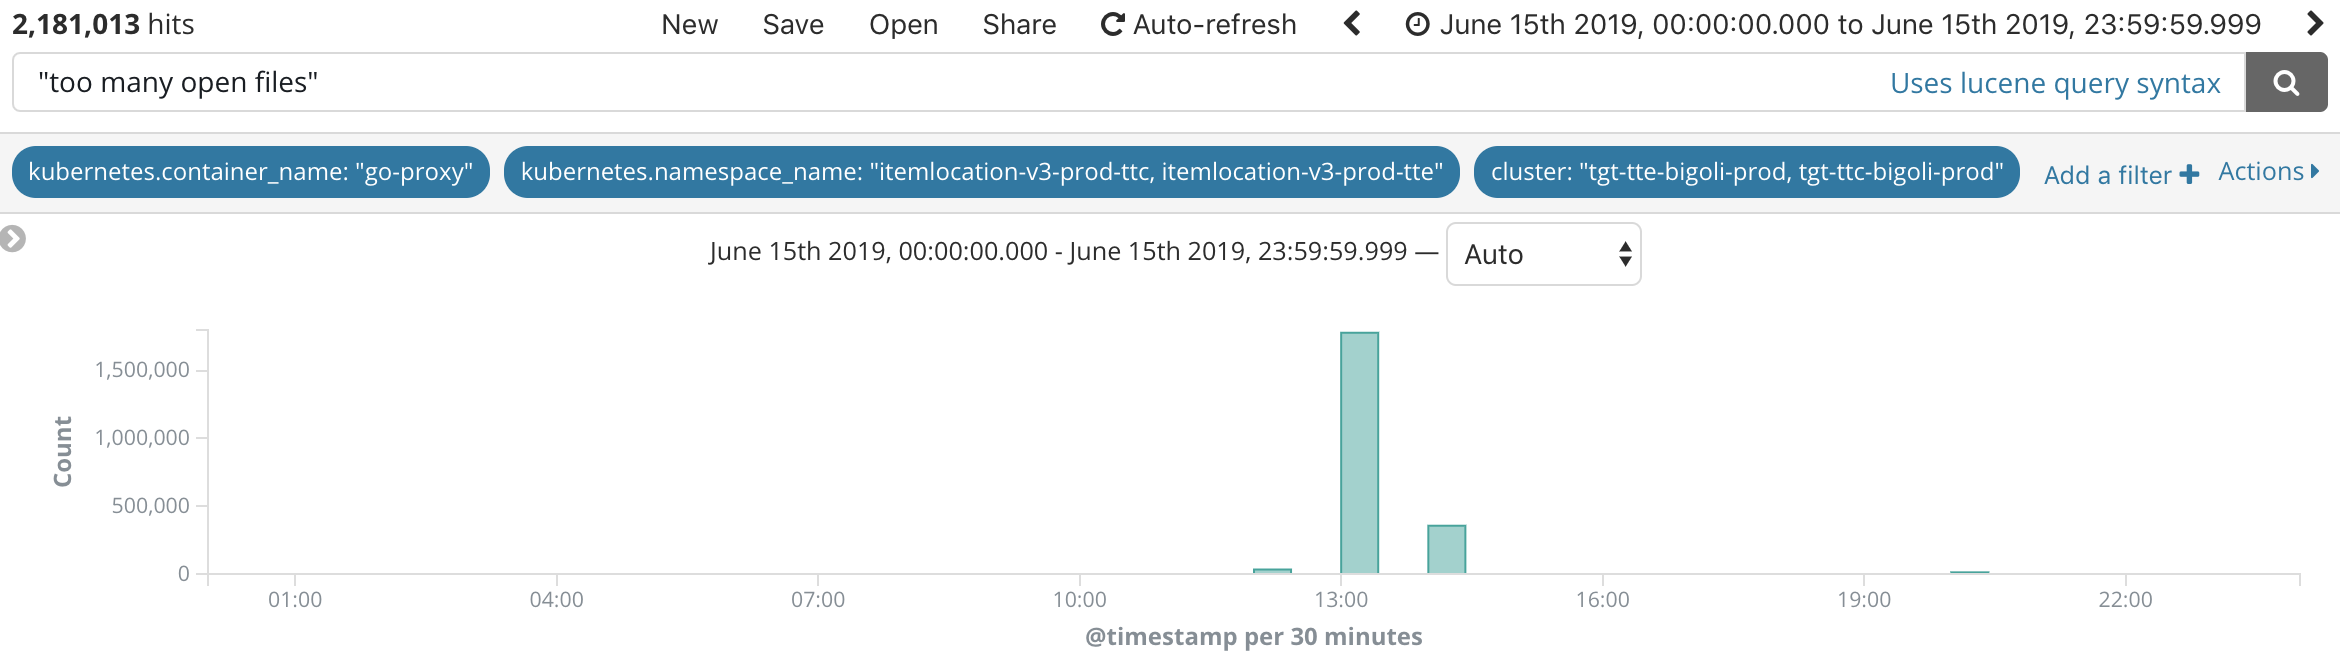 search box showing term "too many open files" with a graph showing June 15, 2019 with a large spike of over 1,500,000 around 1:00pm that day, followed by a smaller bump at 2:00pm